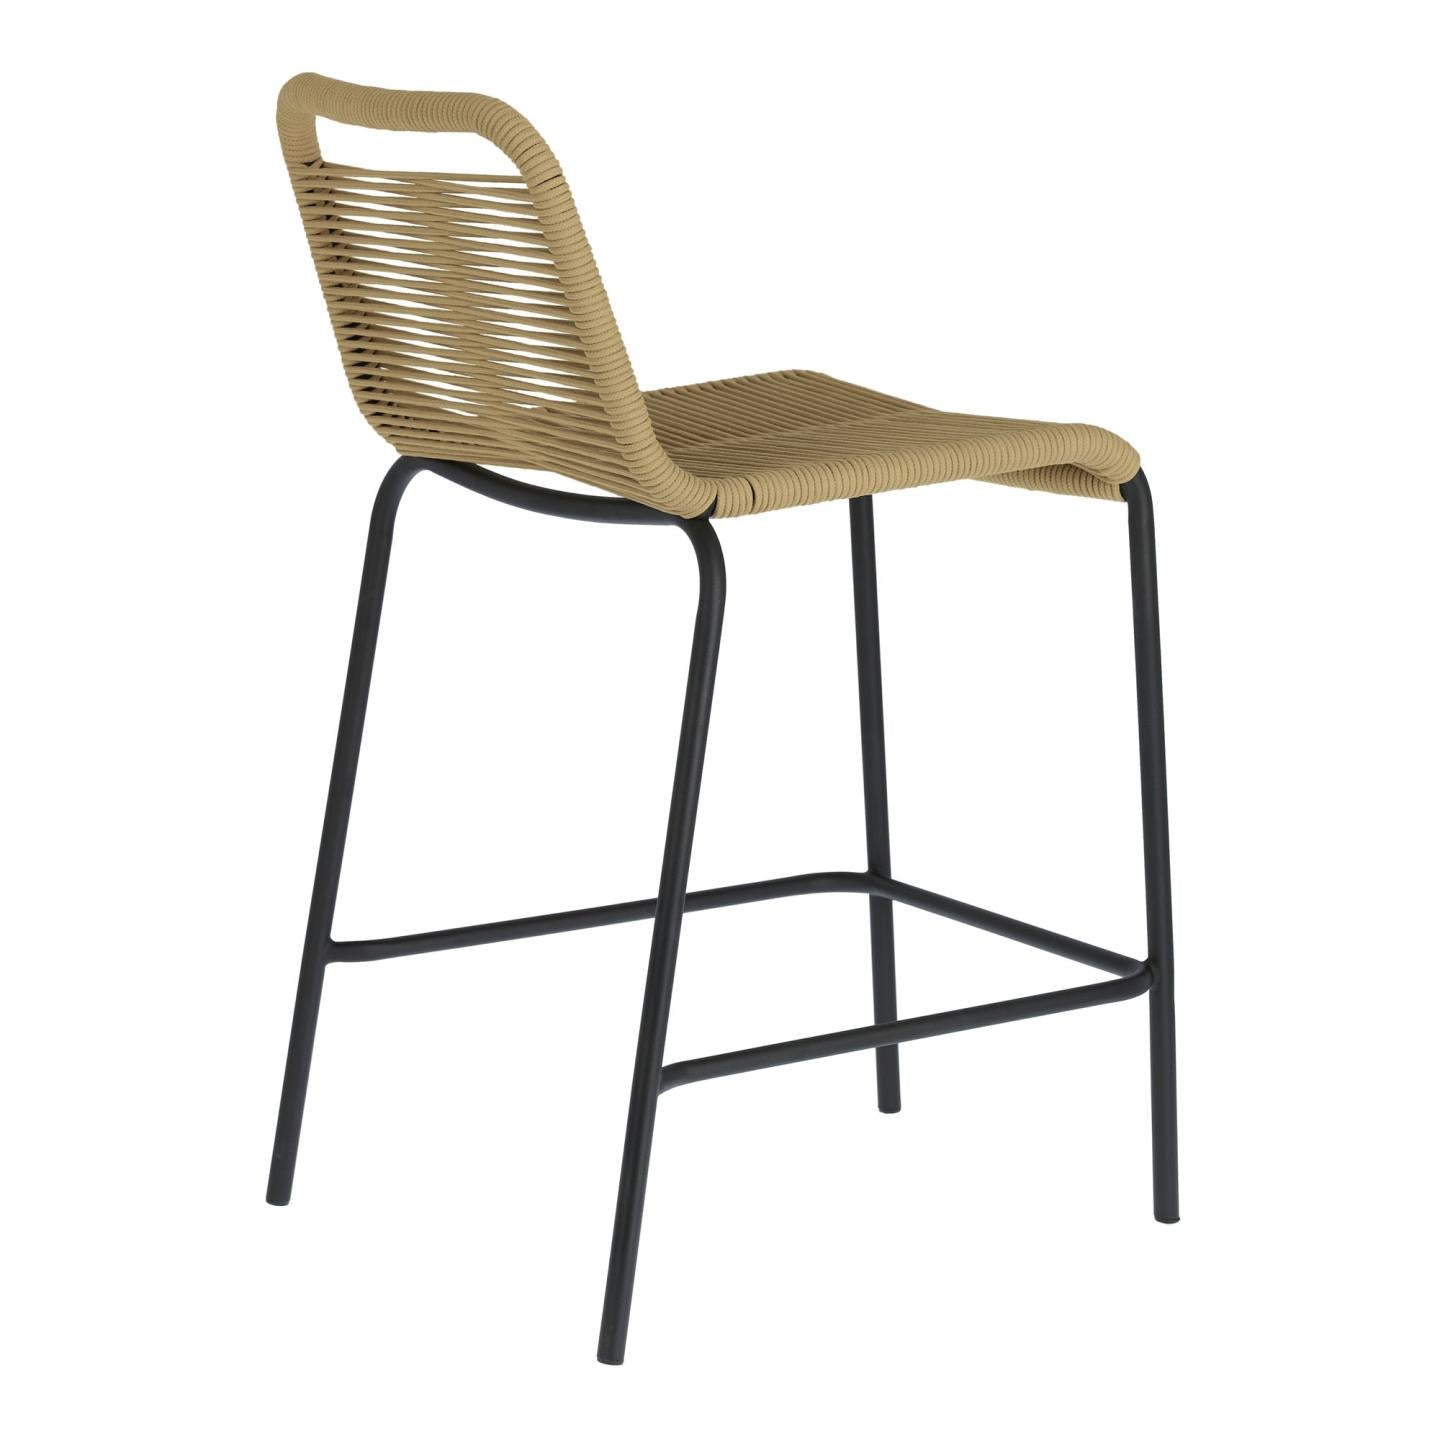 Lambton stackable stool in brown rope and black finish steel, 62 cm